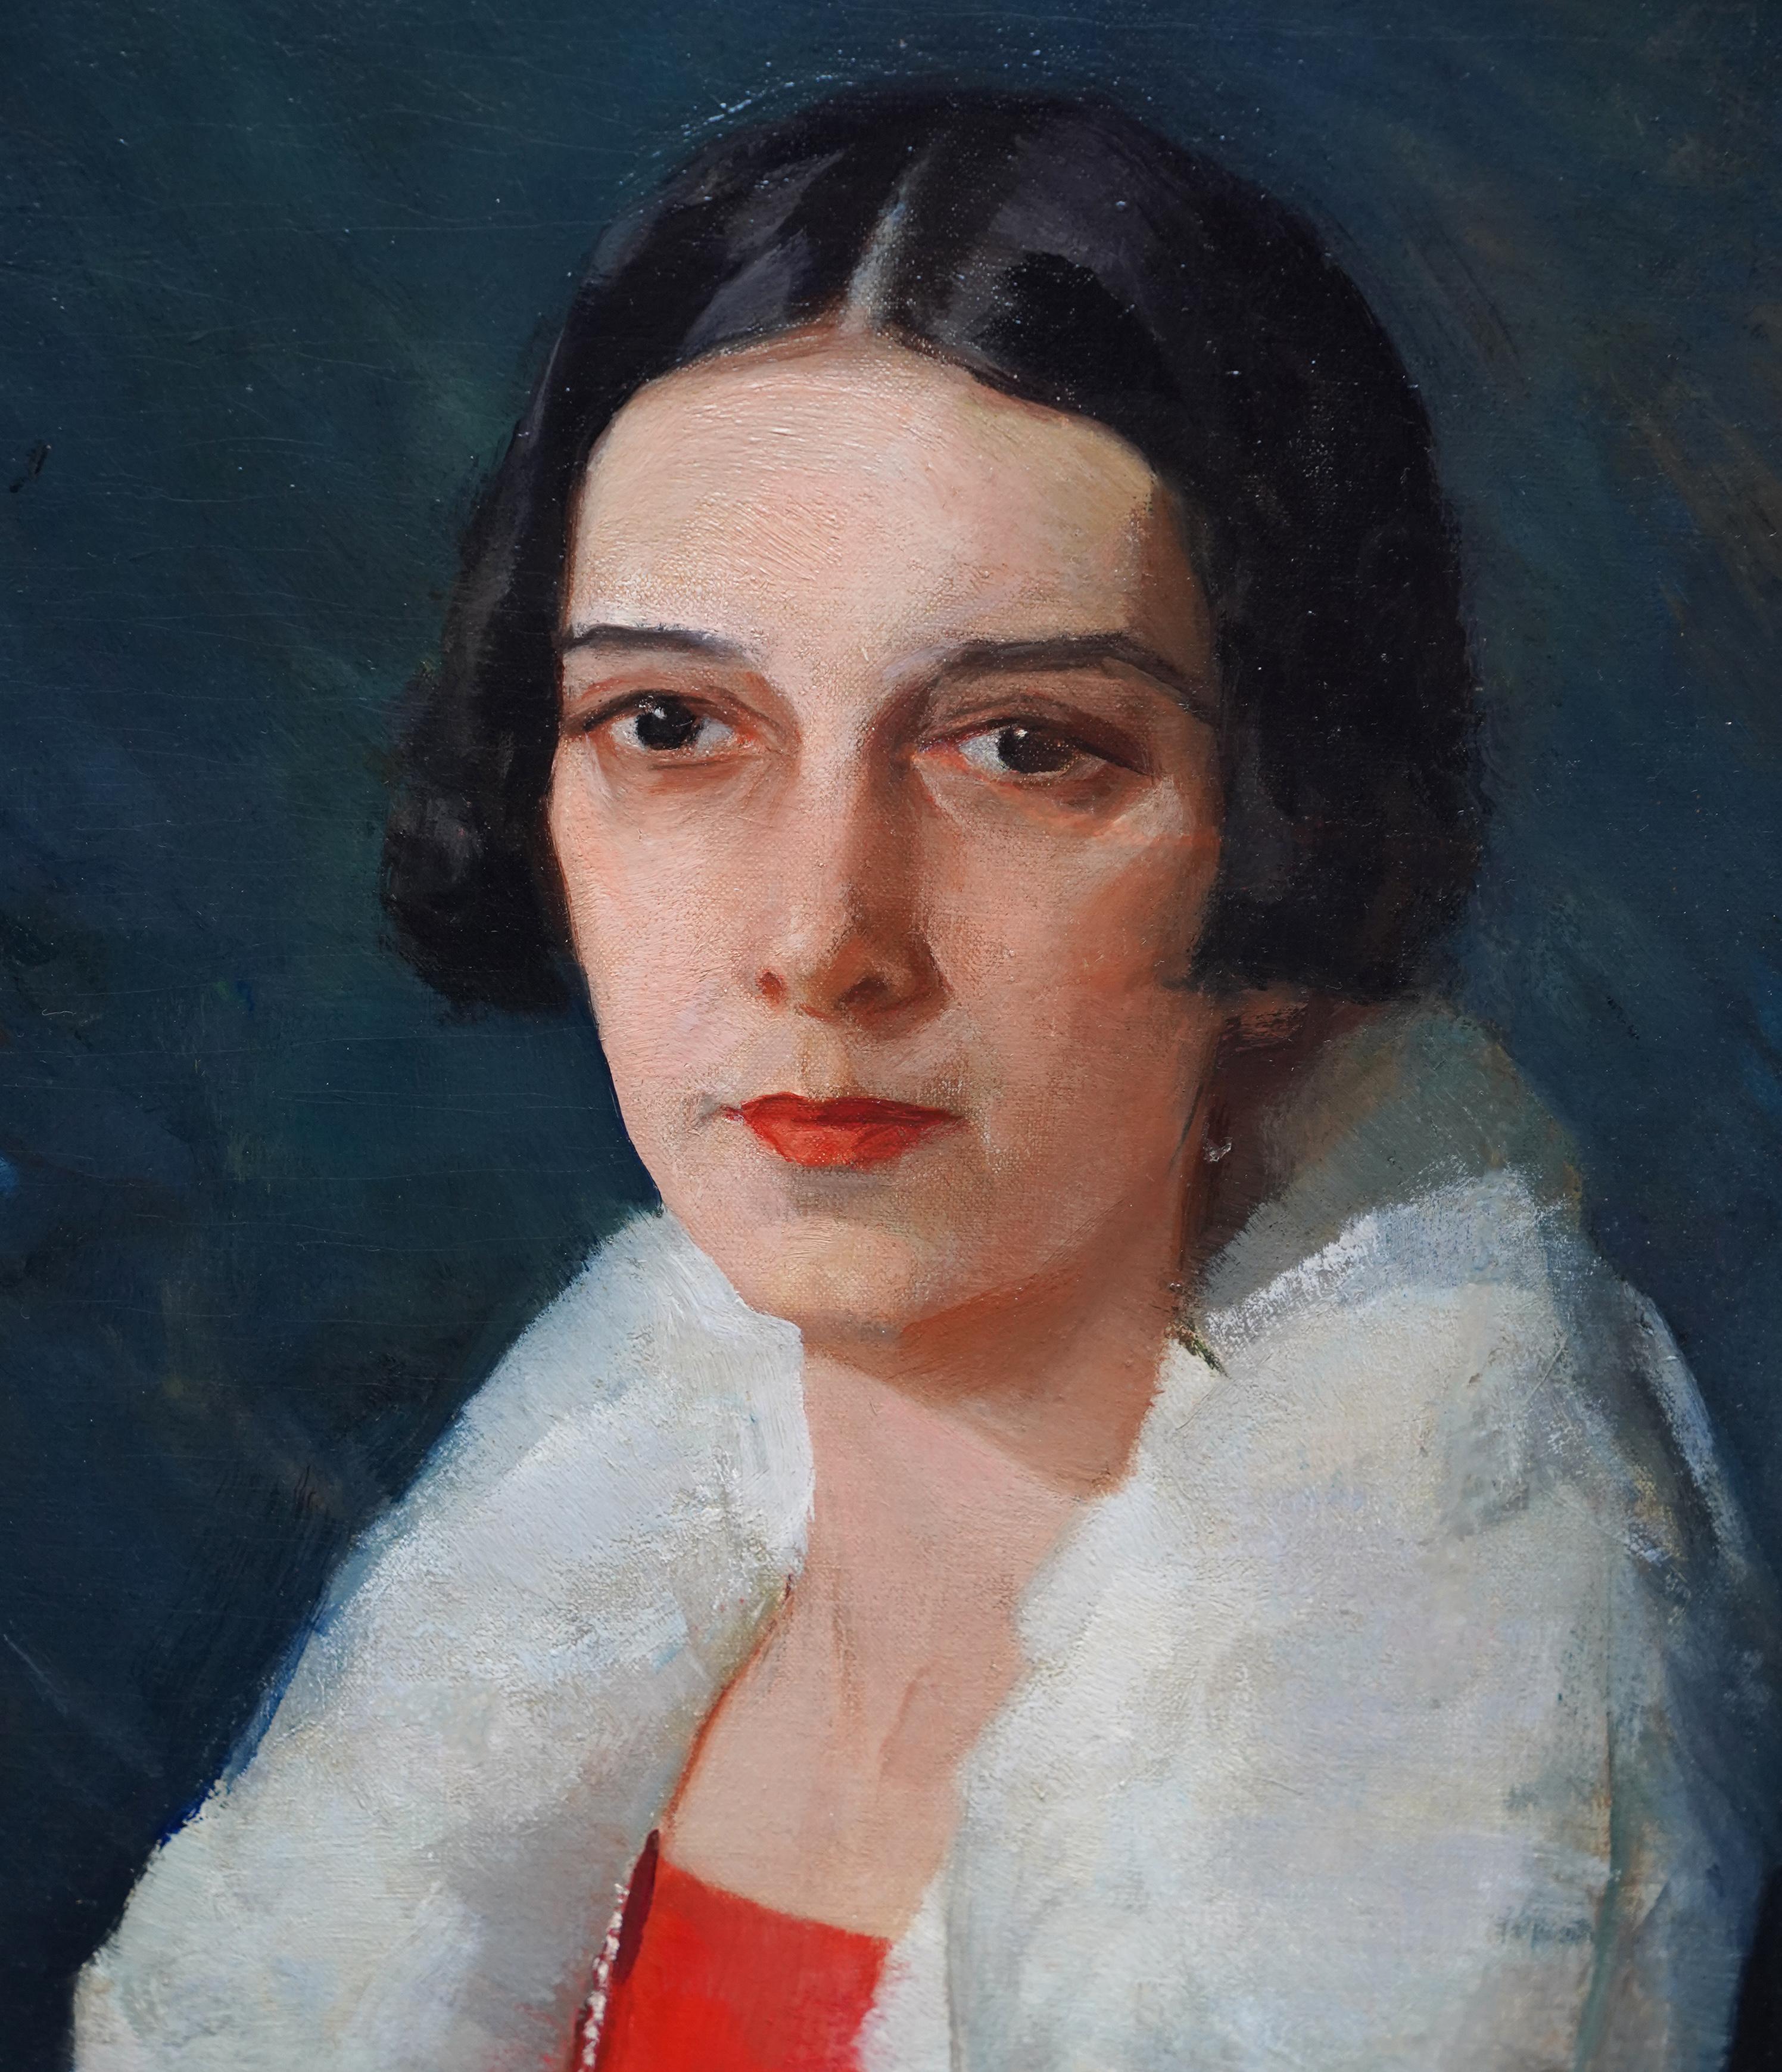 American artist Henry R Rittenberg painted this lovely 1920's Art Deco portrait oil painting. The painting is a standing half length portrait of a lady in a black coat with a white fur collar over a red dress and long beads. She has an elegant